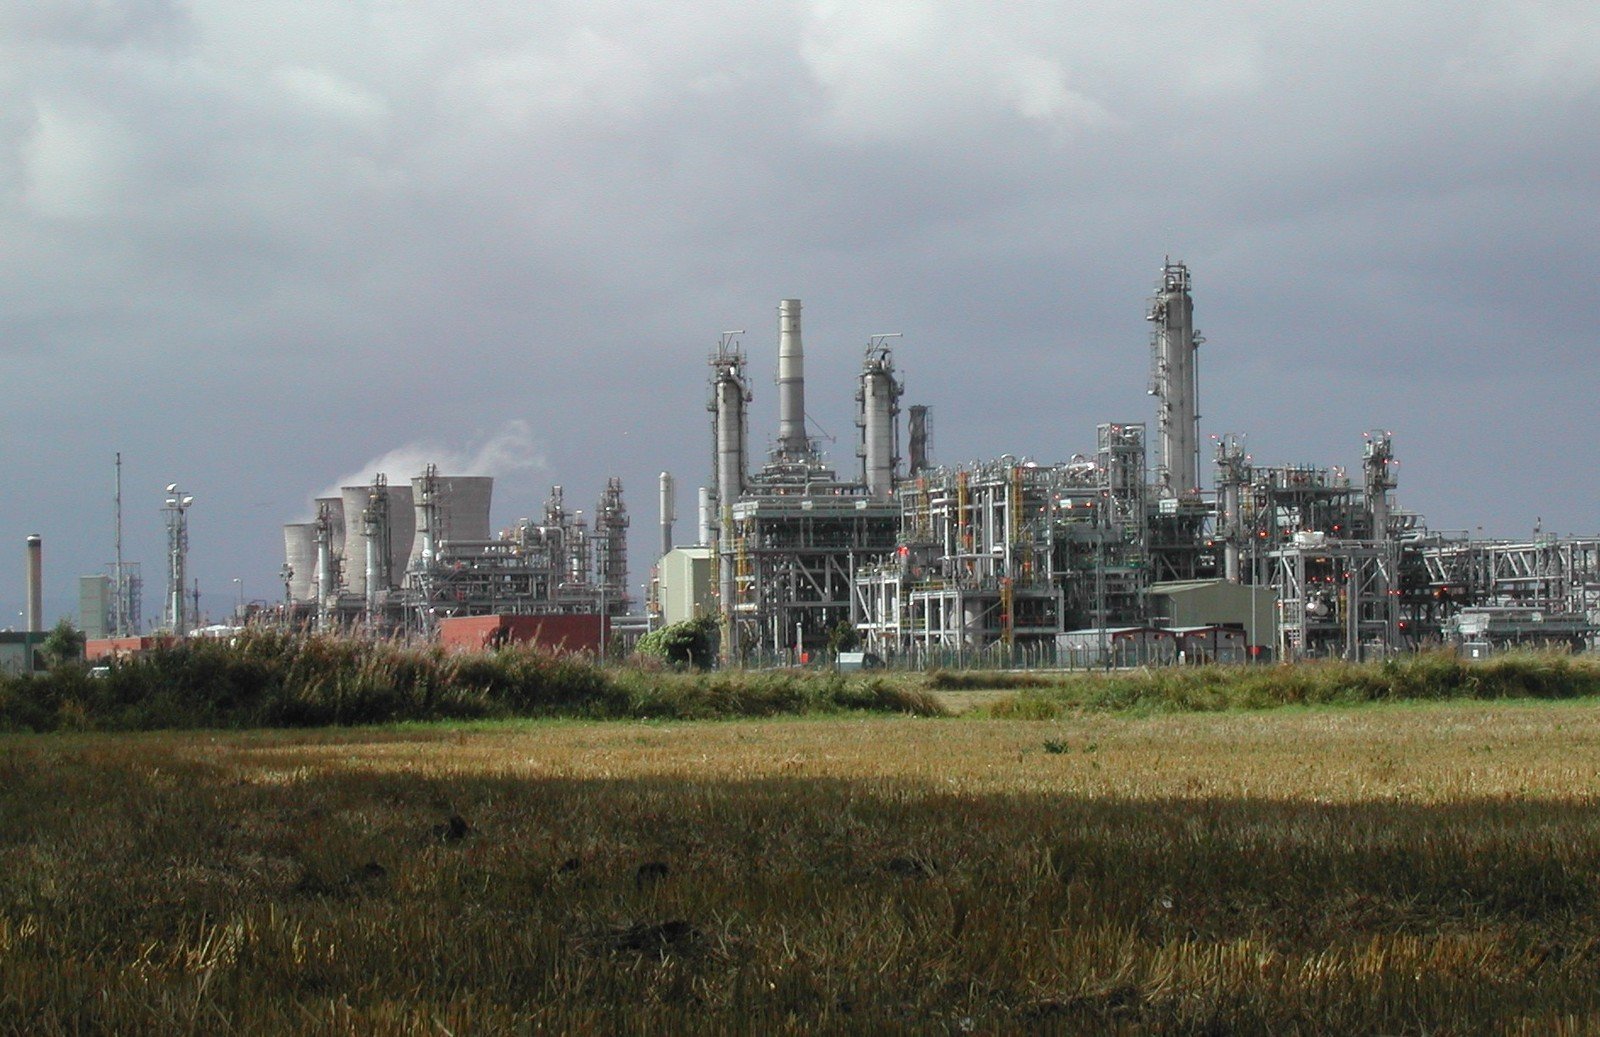 a large factory with smoke stacks is shown